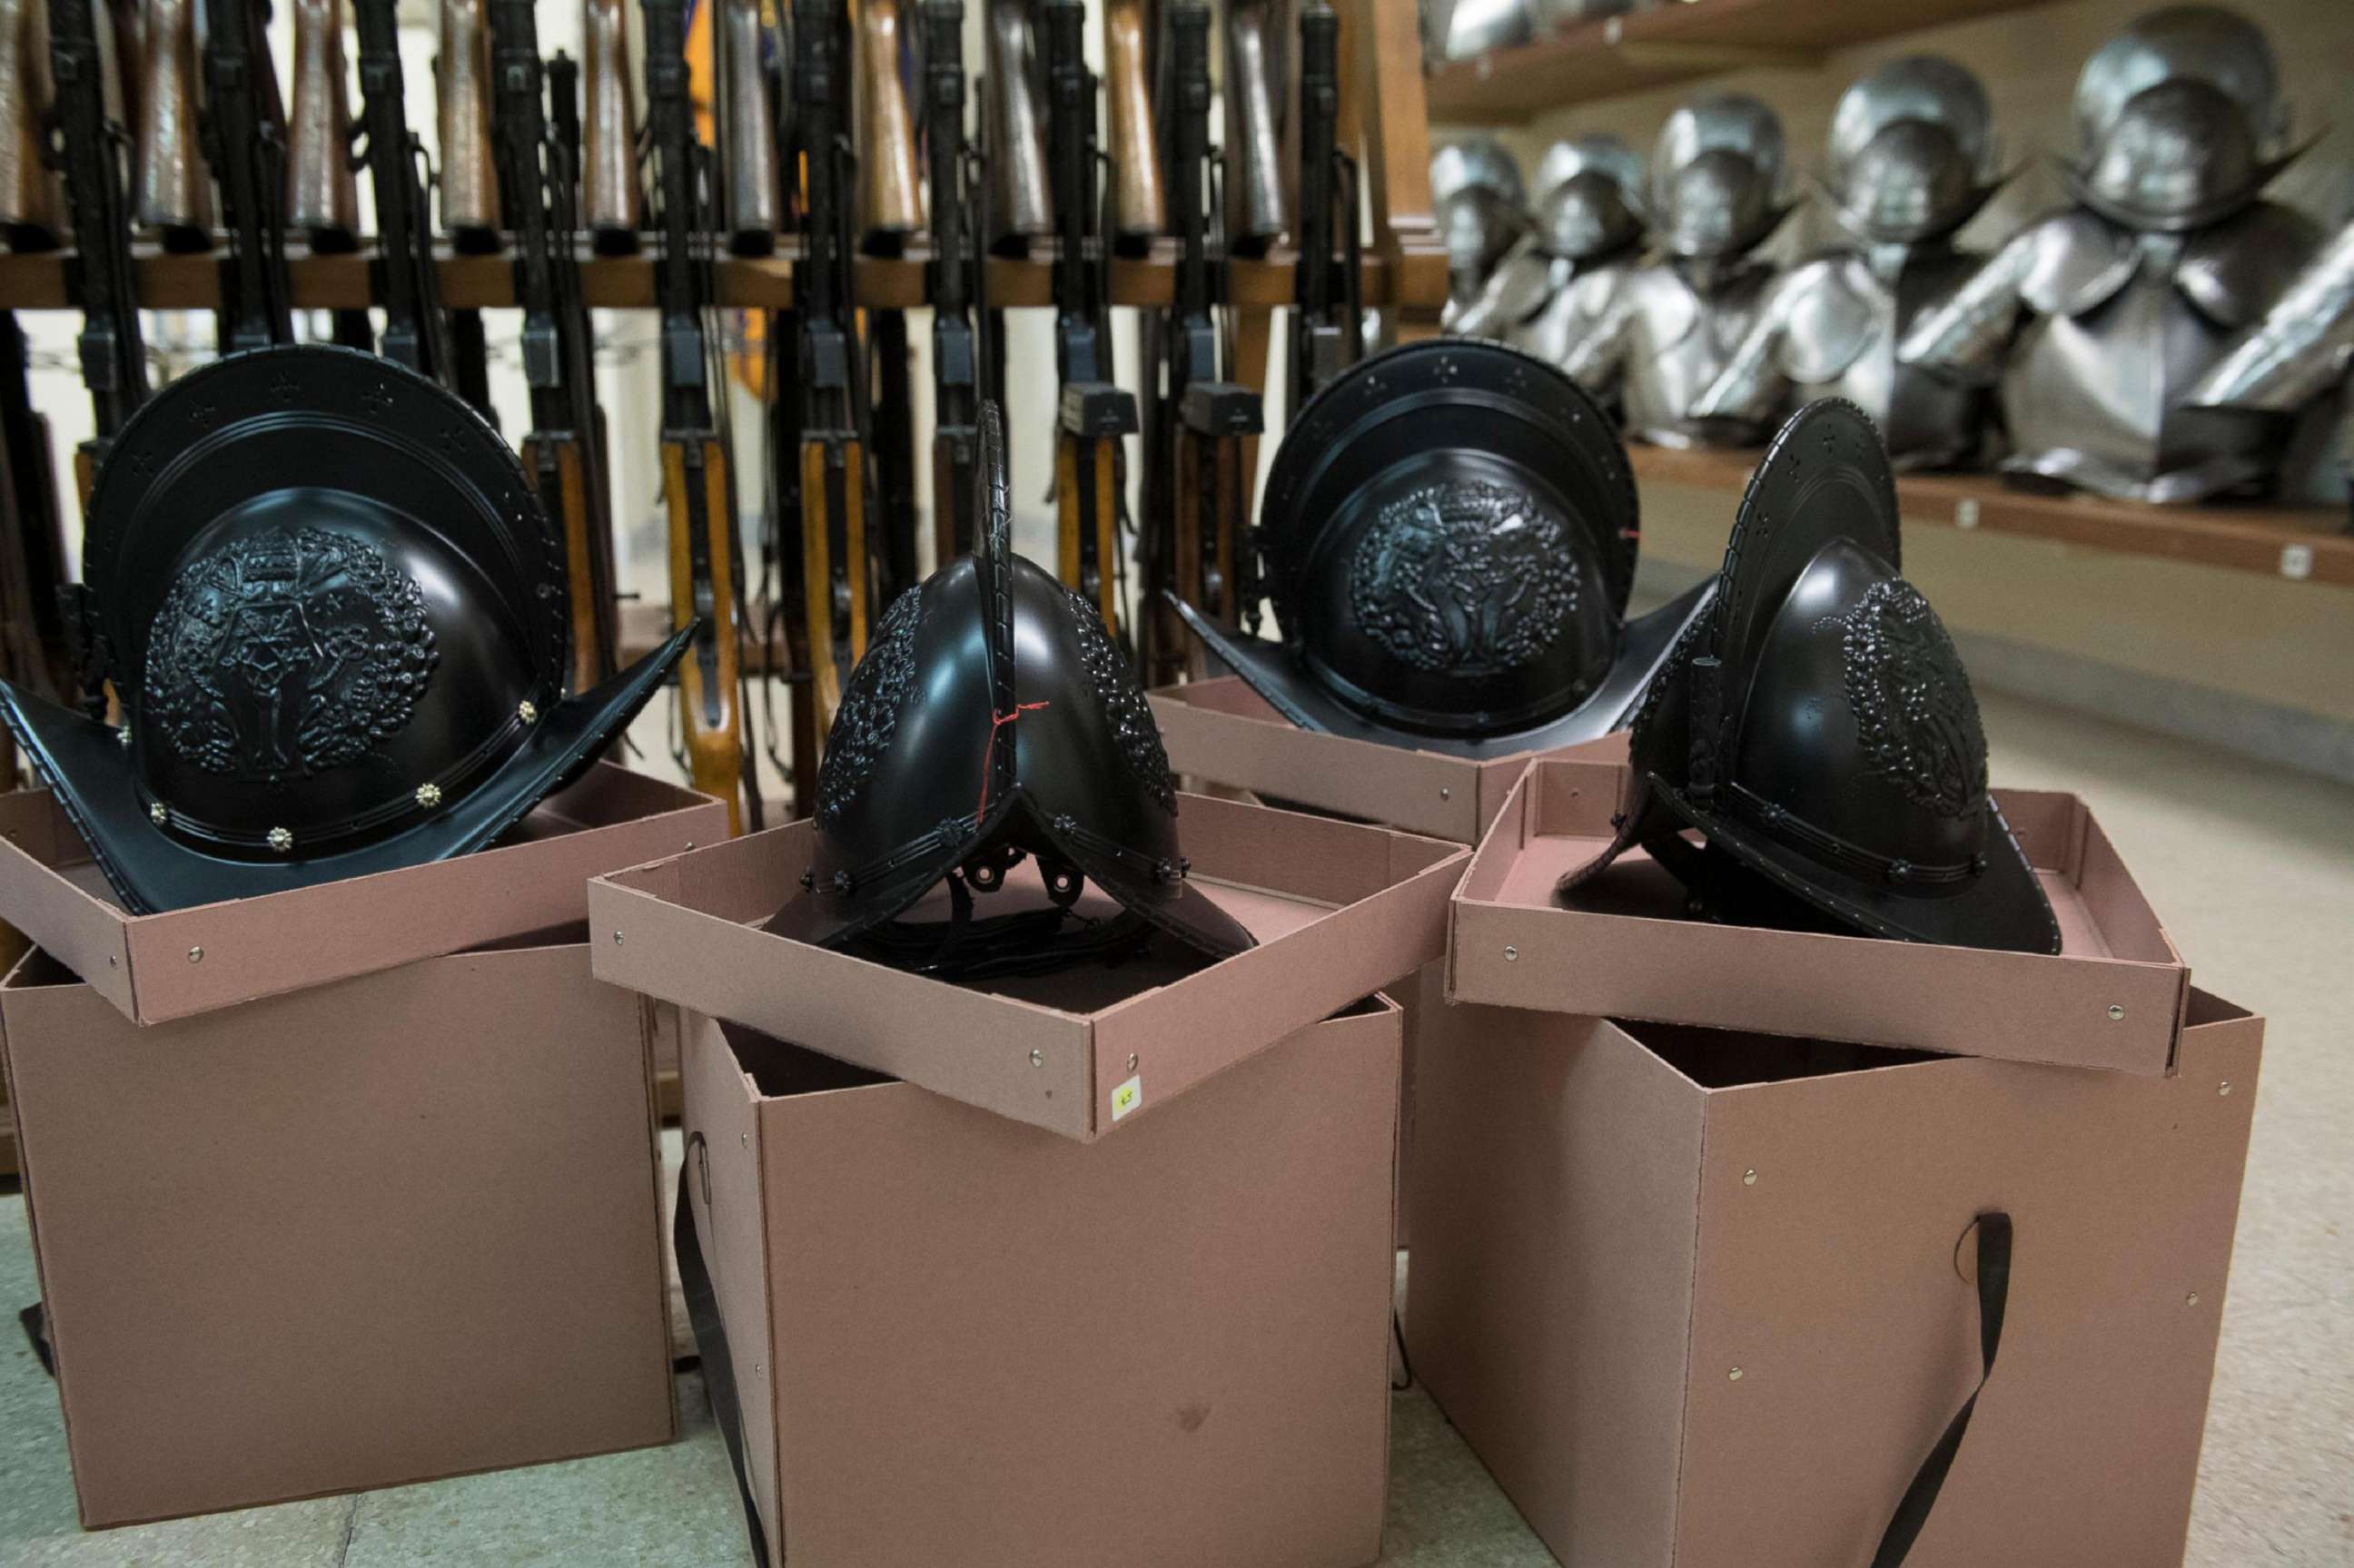 PHOTO: The Pontifical Swiss Guards new helmets made of thermoplastic and made with a 3D printer from a scan of the original metal helmets, Jan. 22, 2019, at the Vatican.